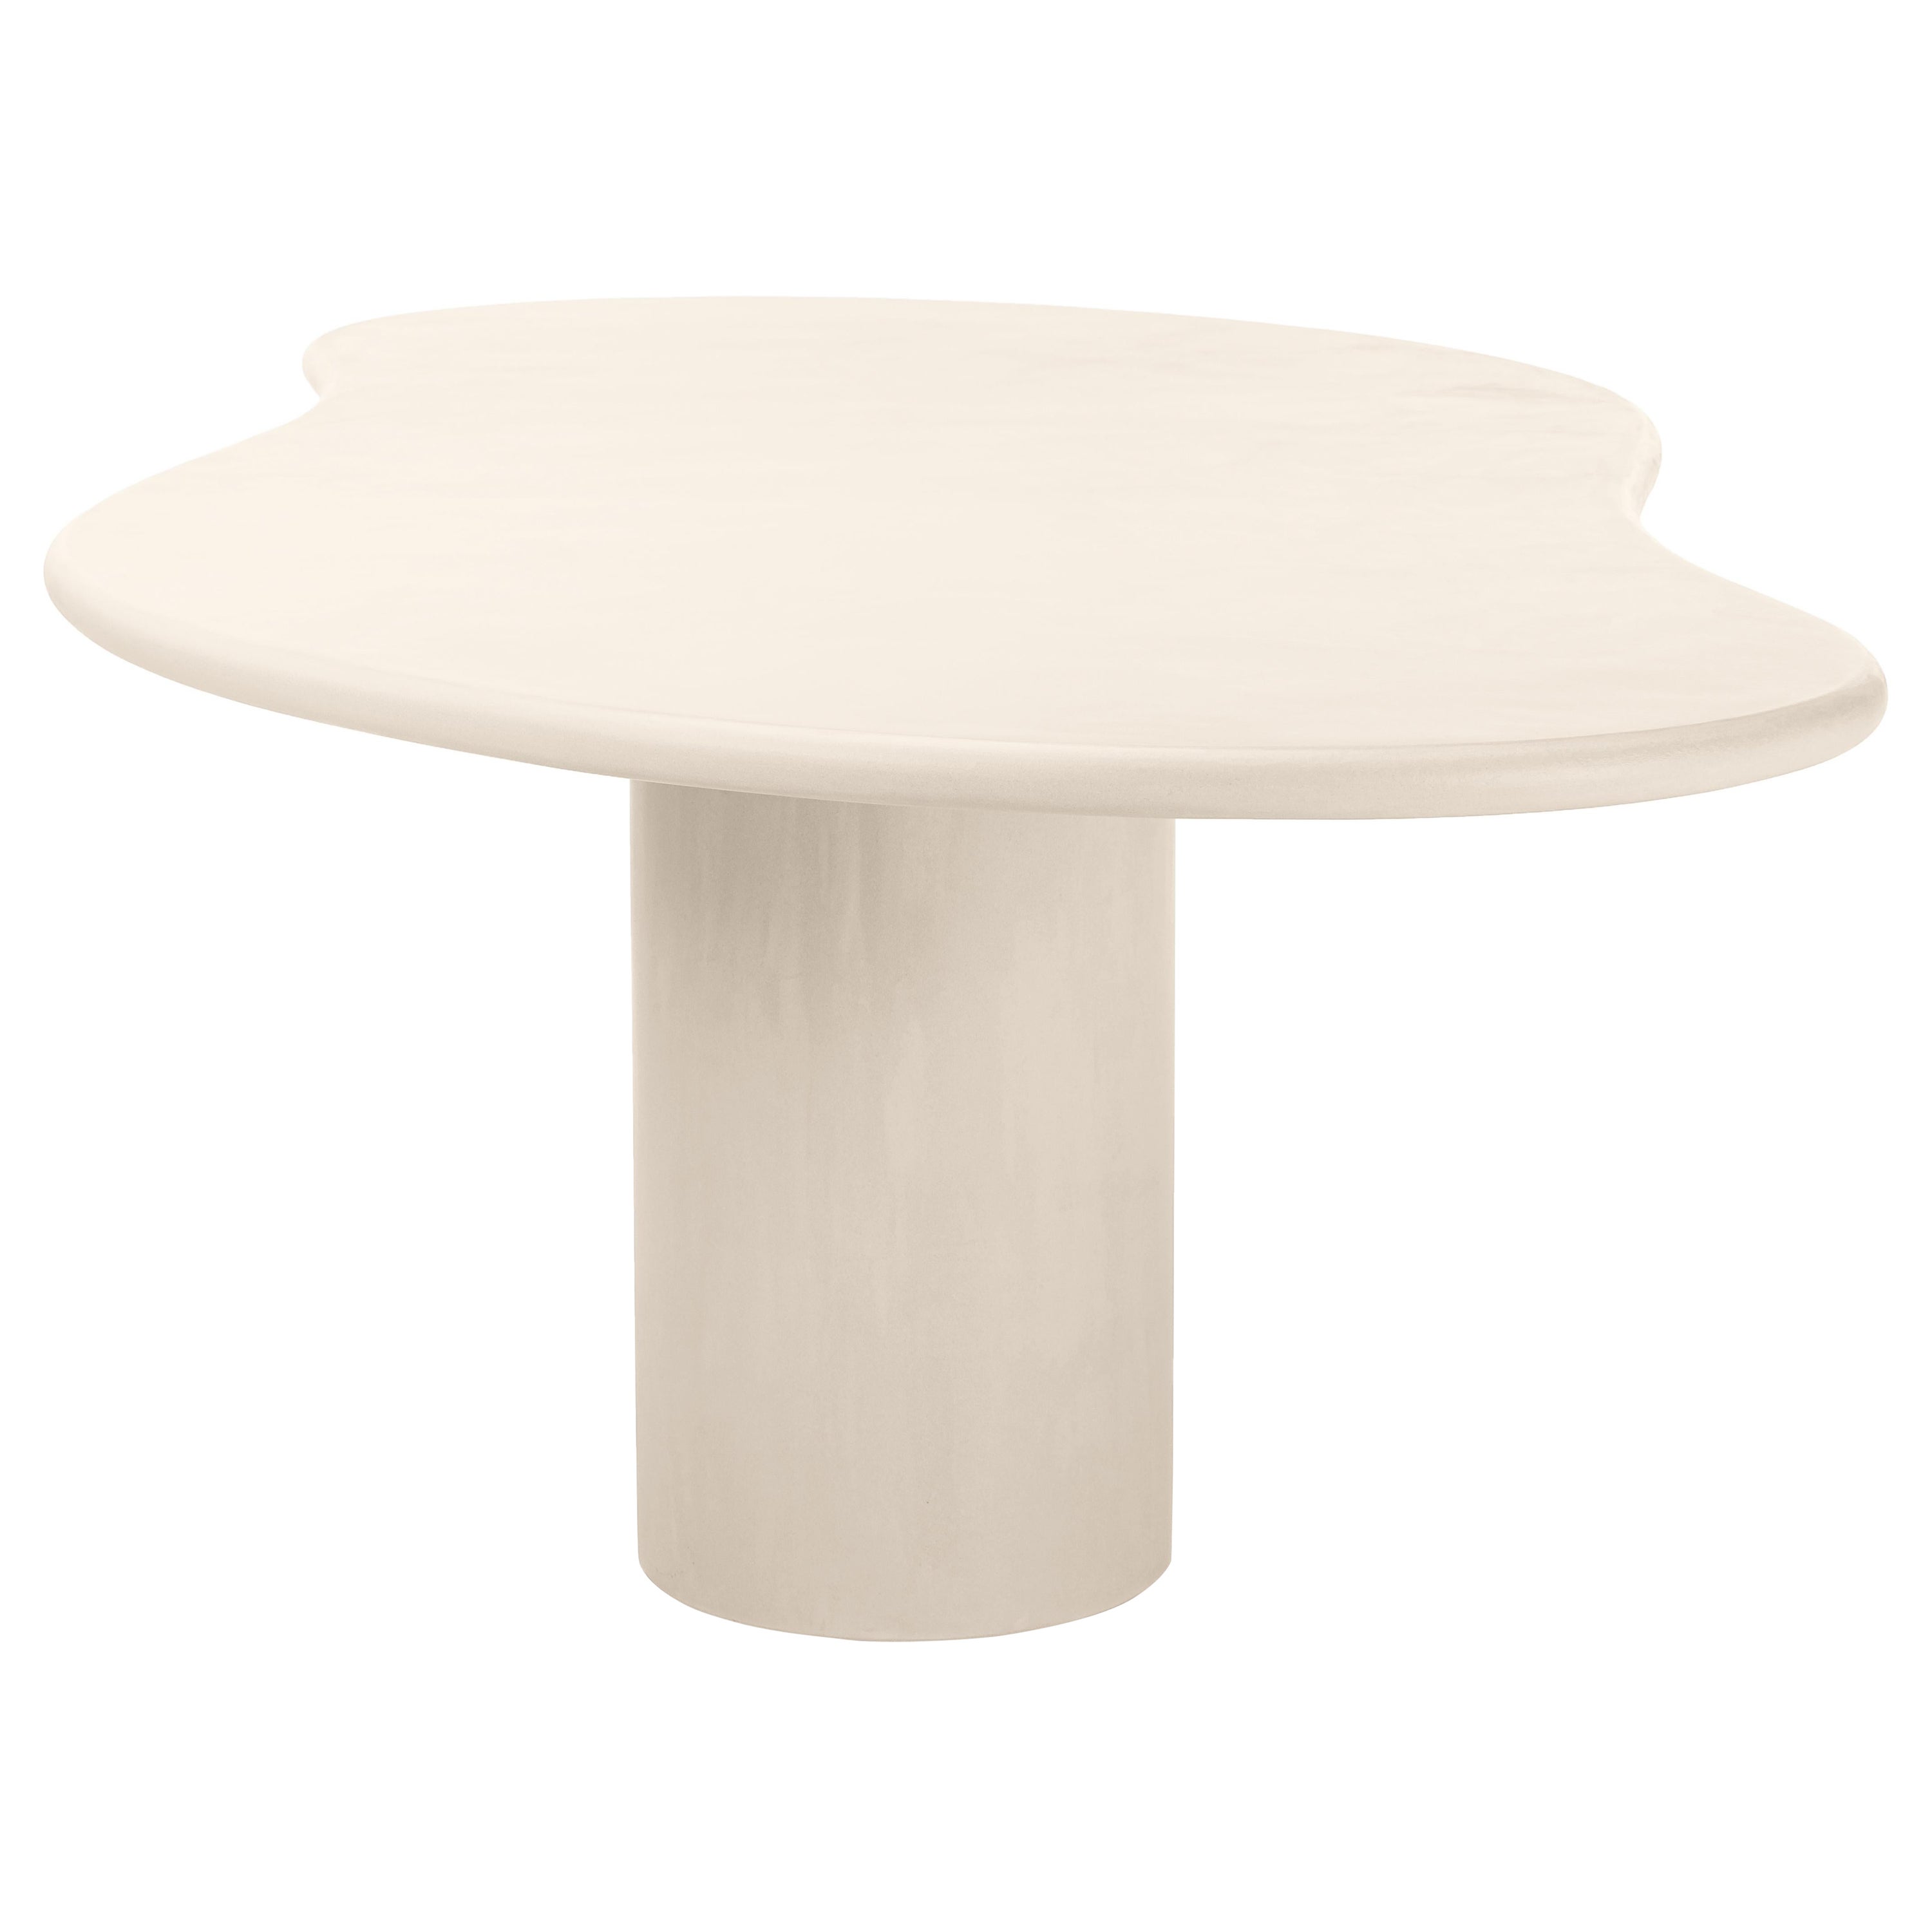 Natural Plaster Dining Table "Latus" 320 by Isabelle Beaumont For Sale